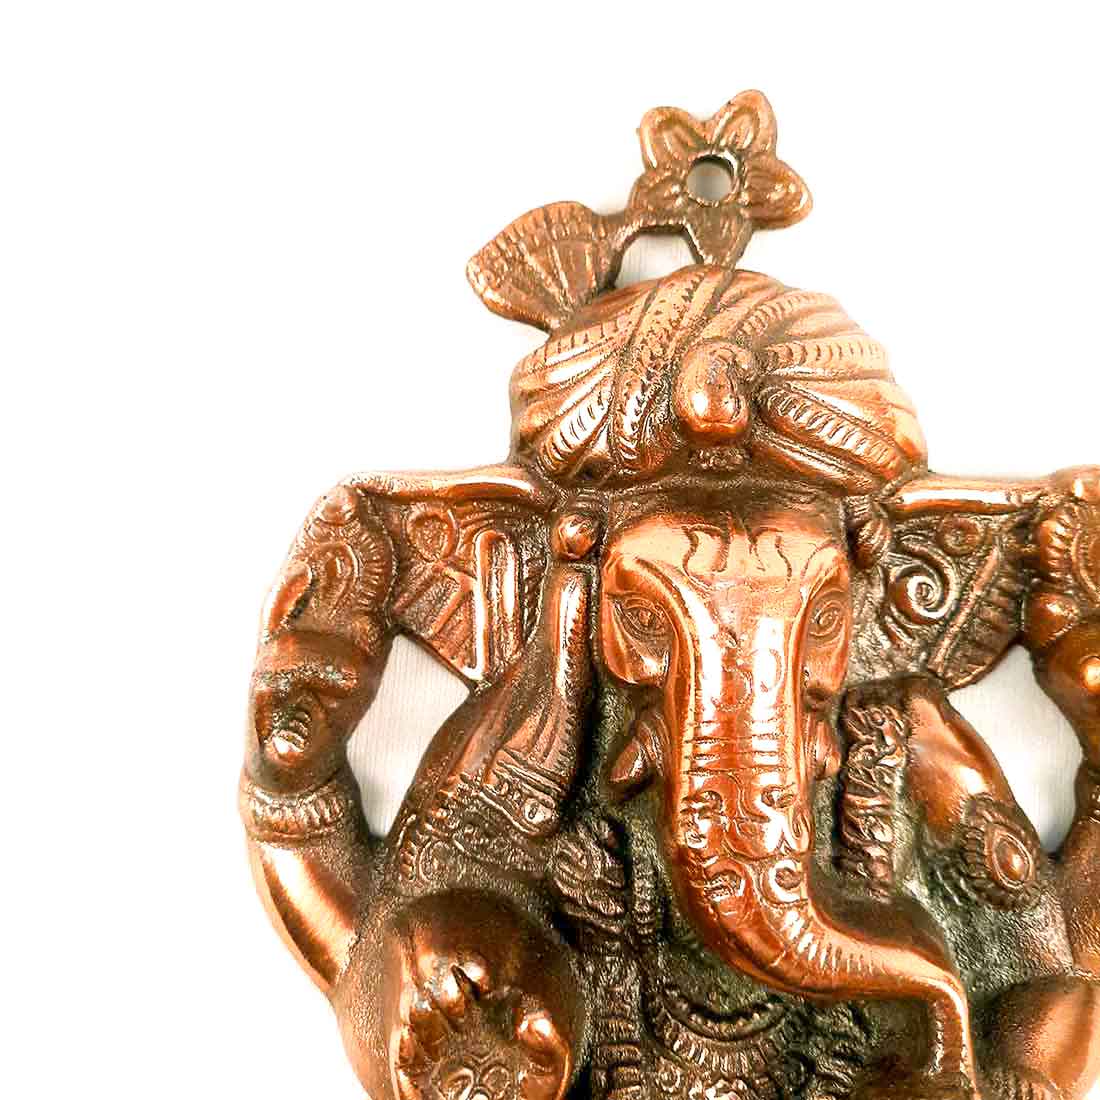 Ganesh Wall Hanging Statue | Lord Ganesha Wall Art - for Home, Puja, Living Room & Office | Antique Idol for Religious & Spiritual Decor - Apkamart #Size_10 Inch